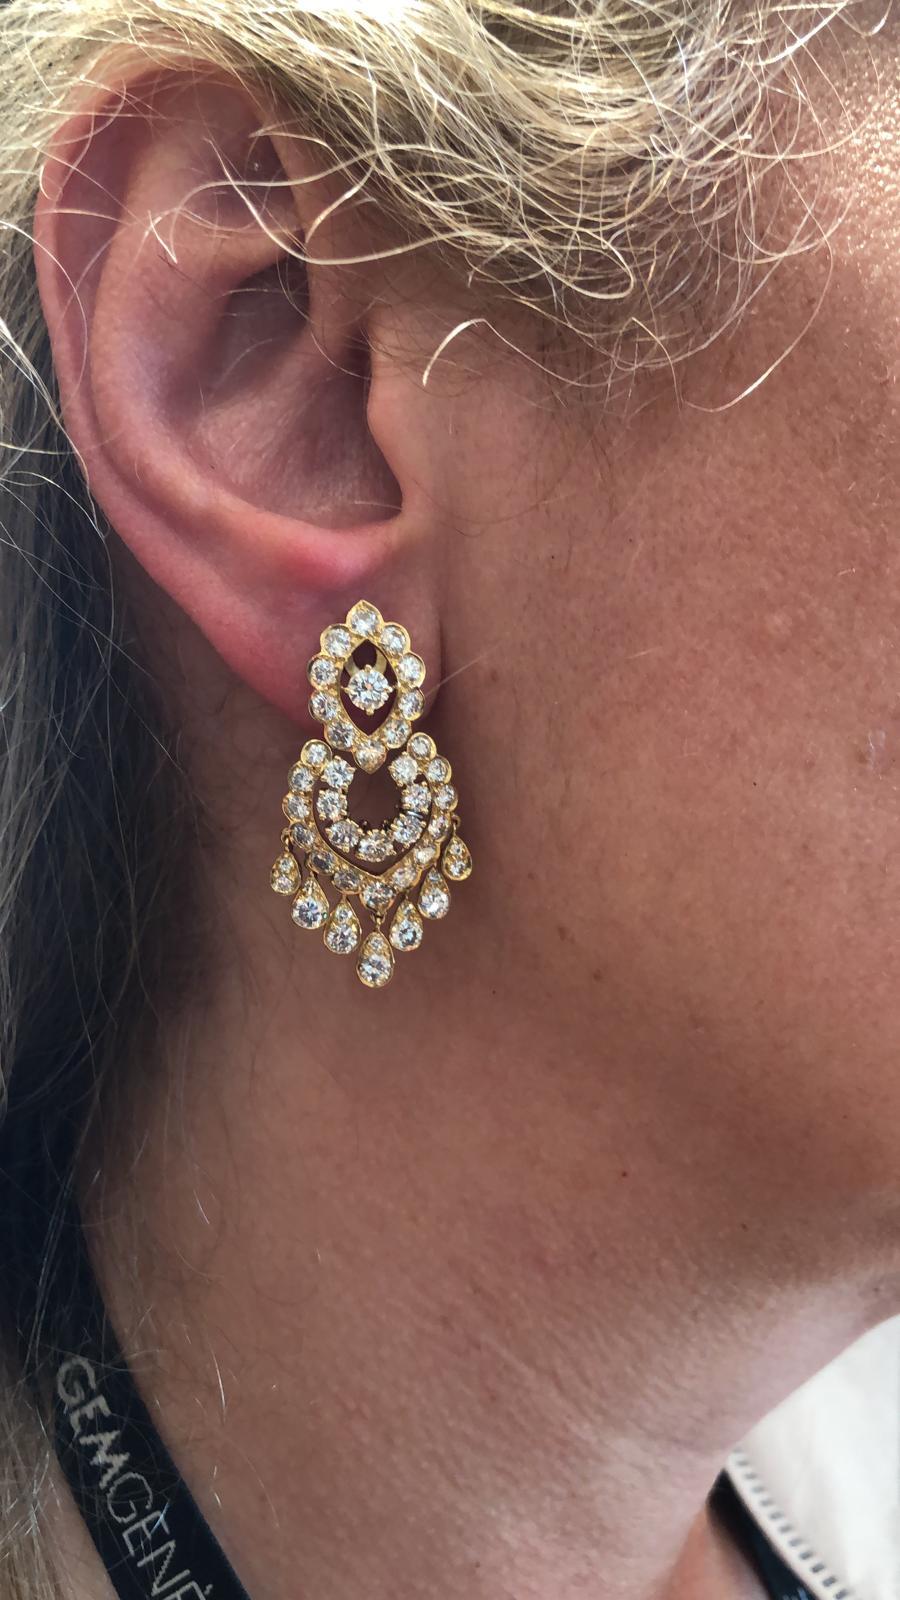 Van Cleef & Arpels Diamond Fringe Chandelier Earrings in 18k Yellow Gold.

A pair of articulated earrings by Van Cleef & Arpels, with a marquise-shaped floret surrounded by a chandelier of scalloped frames and fringed passementerie. The movement of